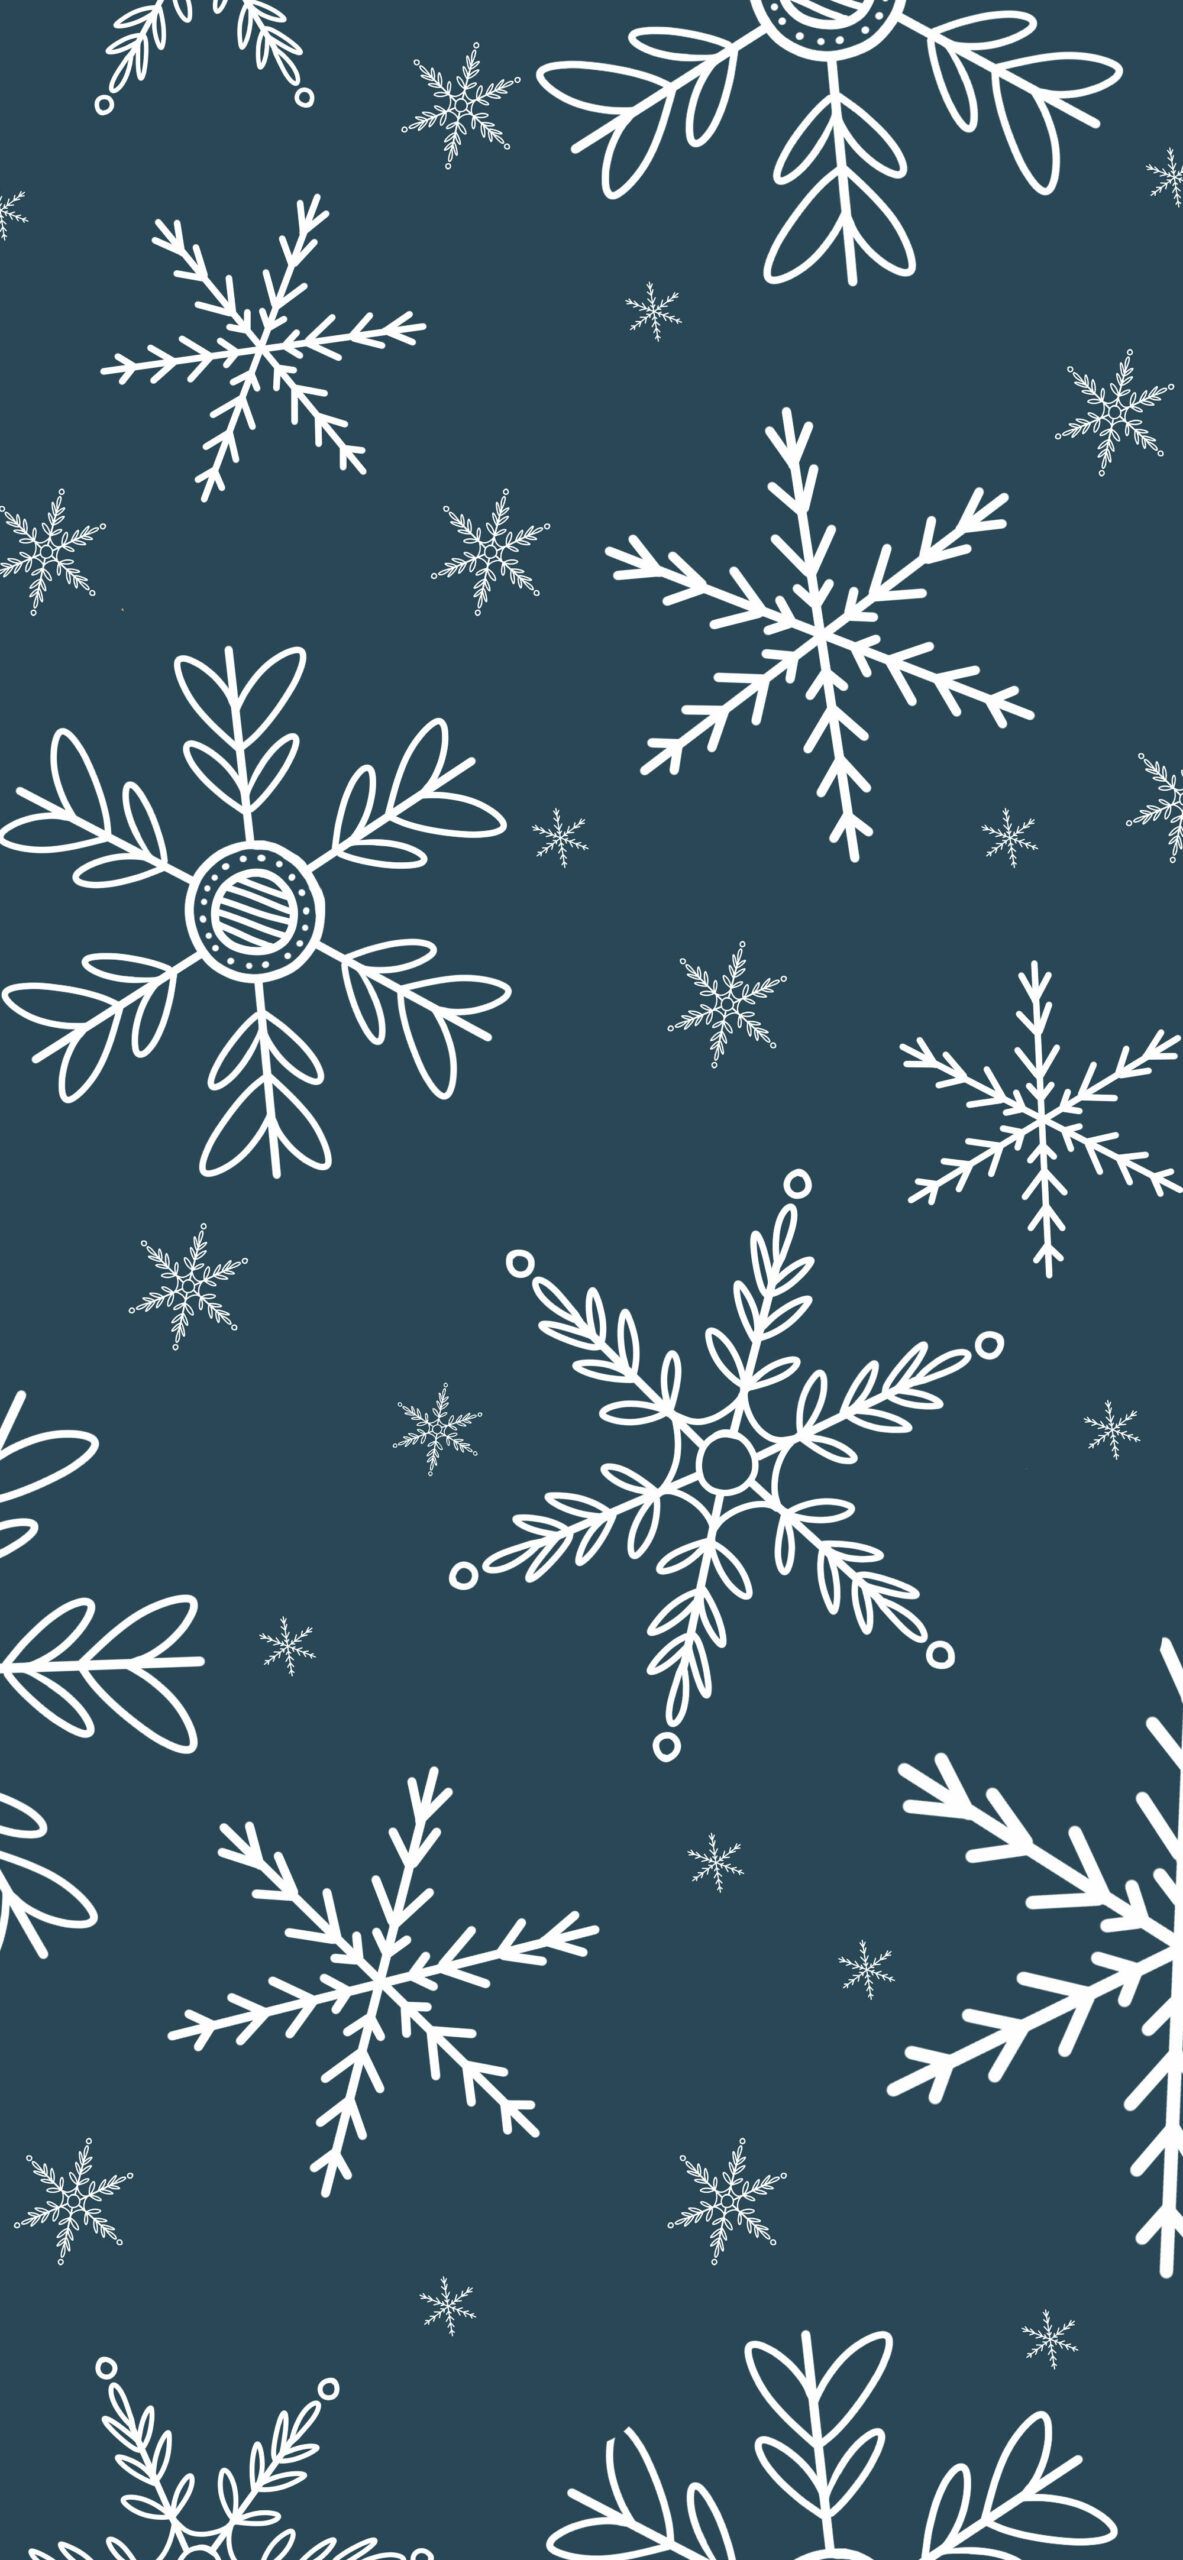 A blue background with white snowflakes on it - Snowflake, winter